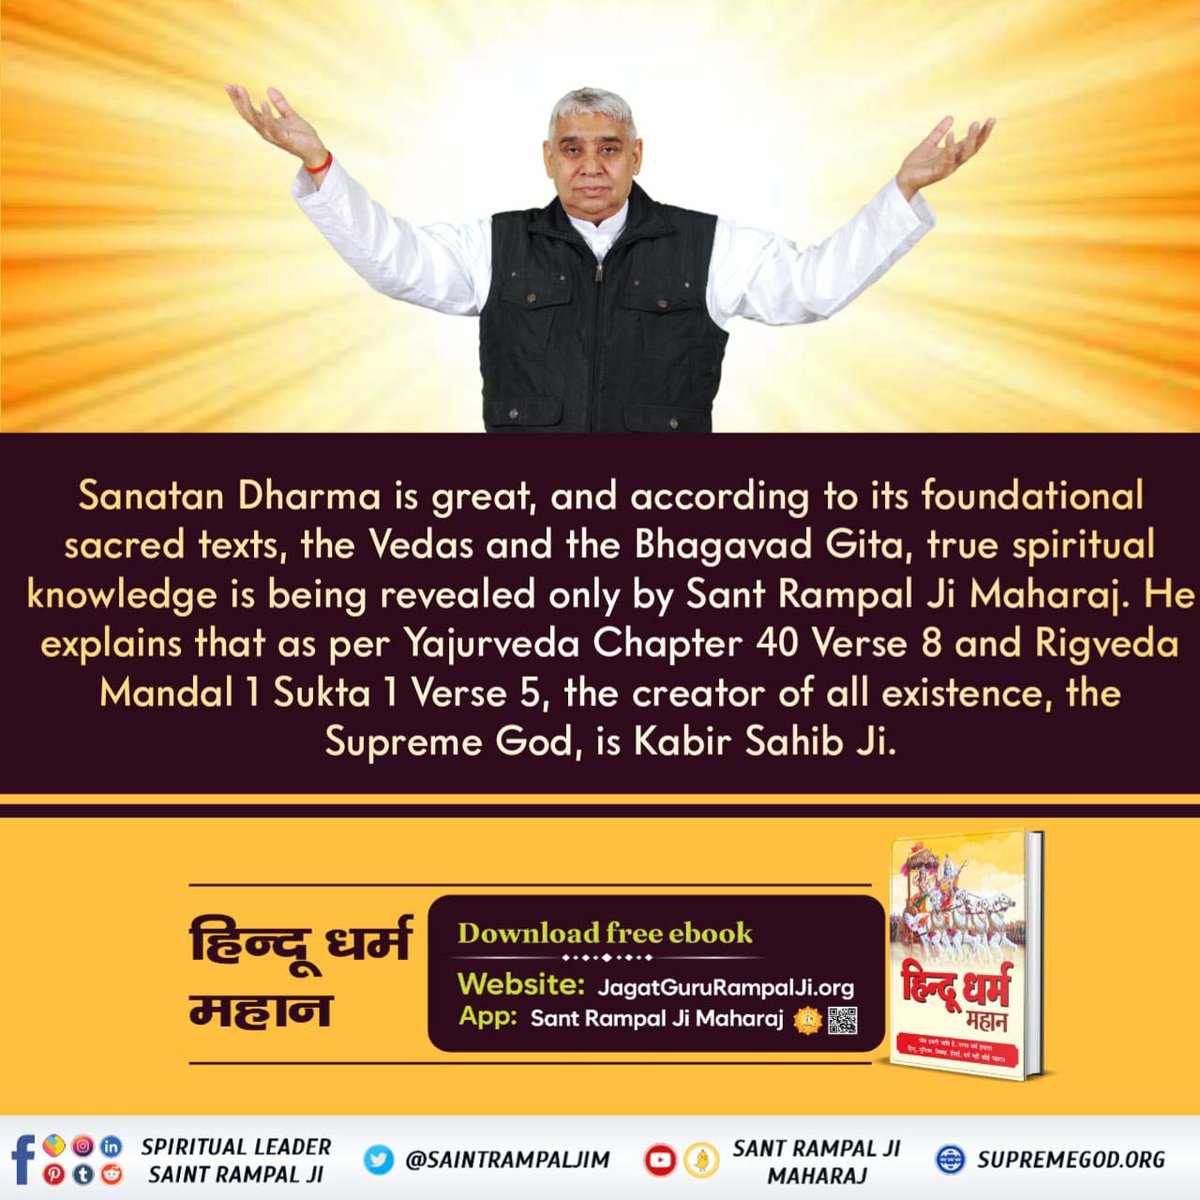 #आओ_जानें_सनातन_को Sanatan Dharma is great, whose basic scriptures are the true knowledge according to the Holy Vedas and the Holy Geeta. Only Saint Rampal Ji Maharaj is telling that according to Yajurveda.